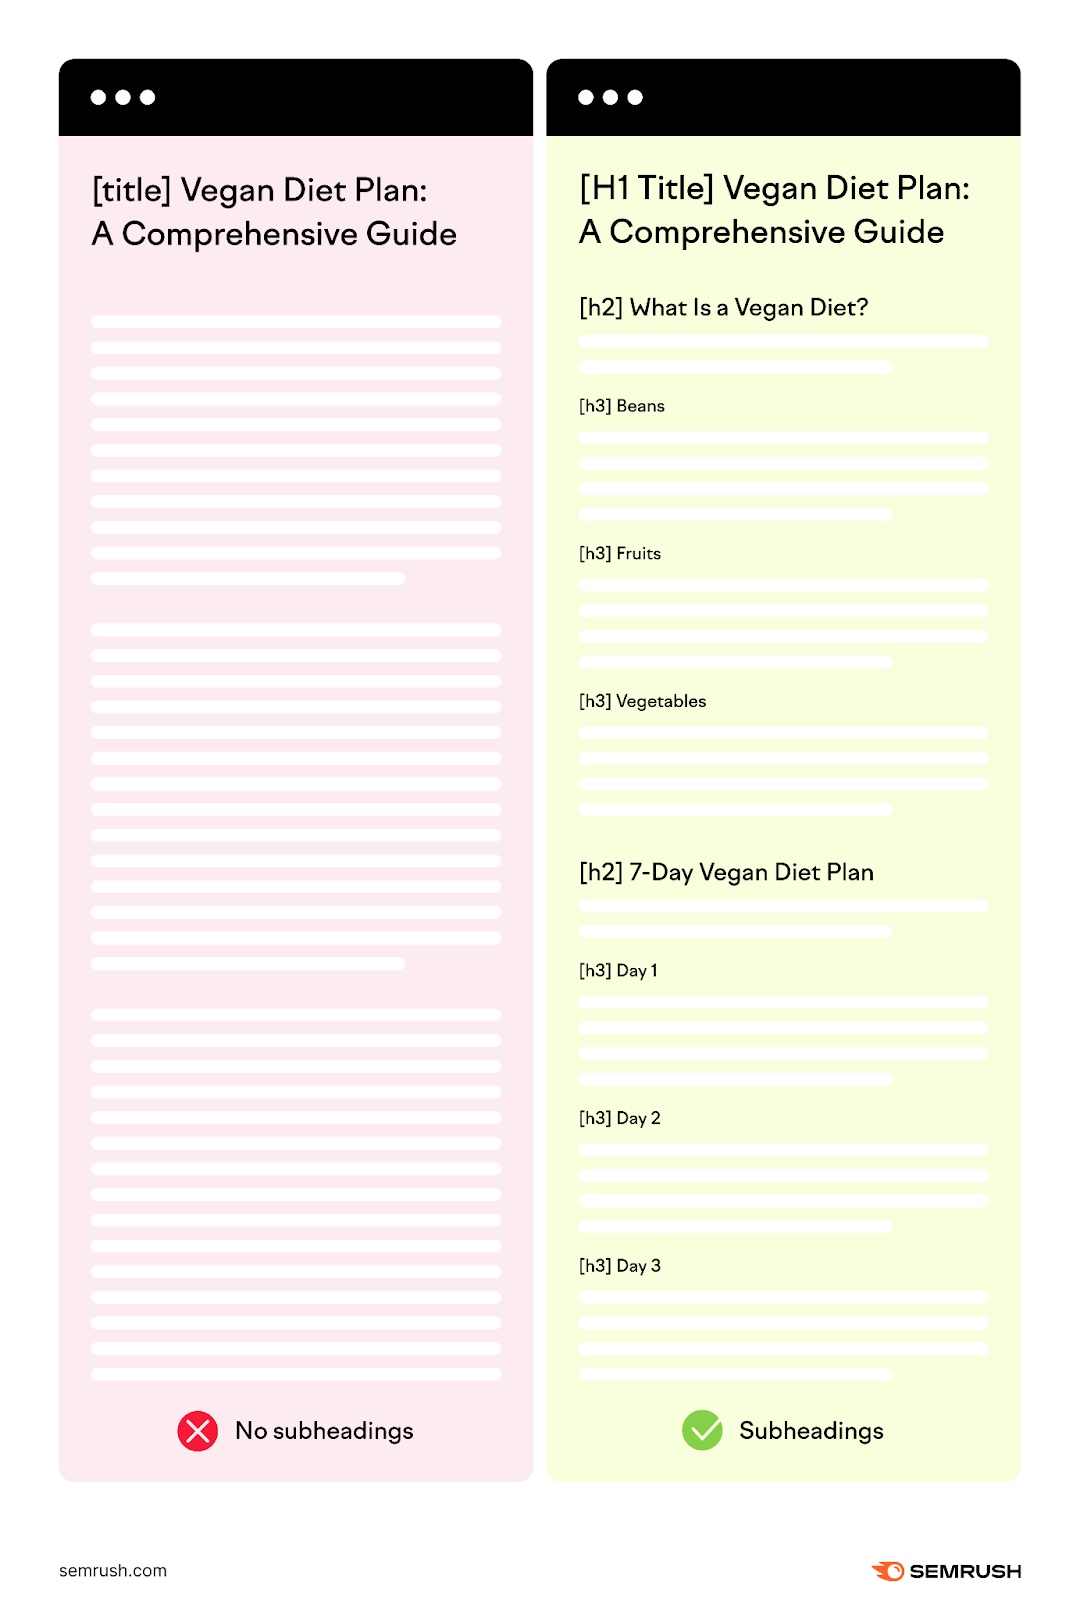 A infographic showing a page with no subheadings (left) and subheadings (right)